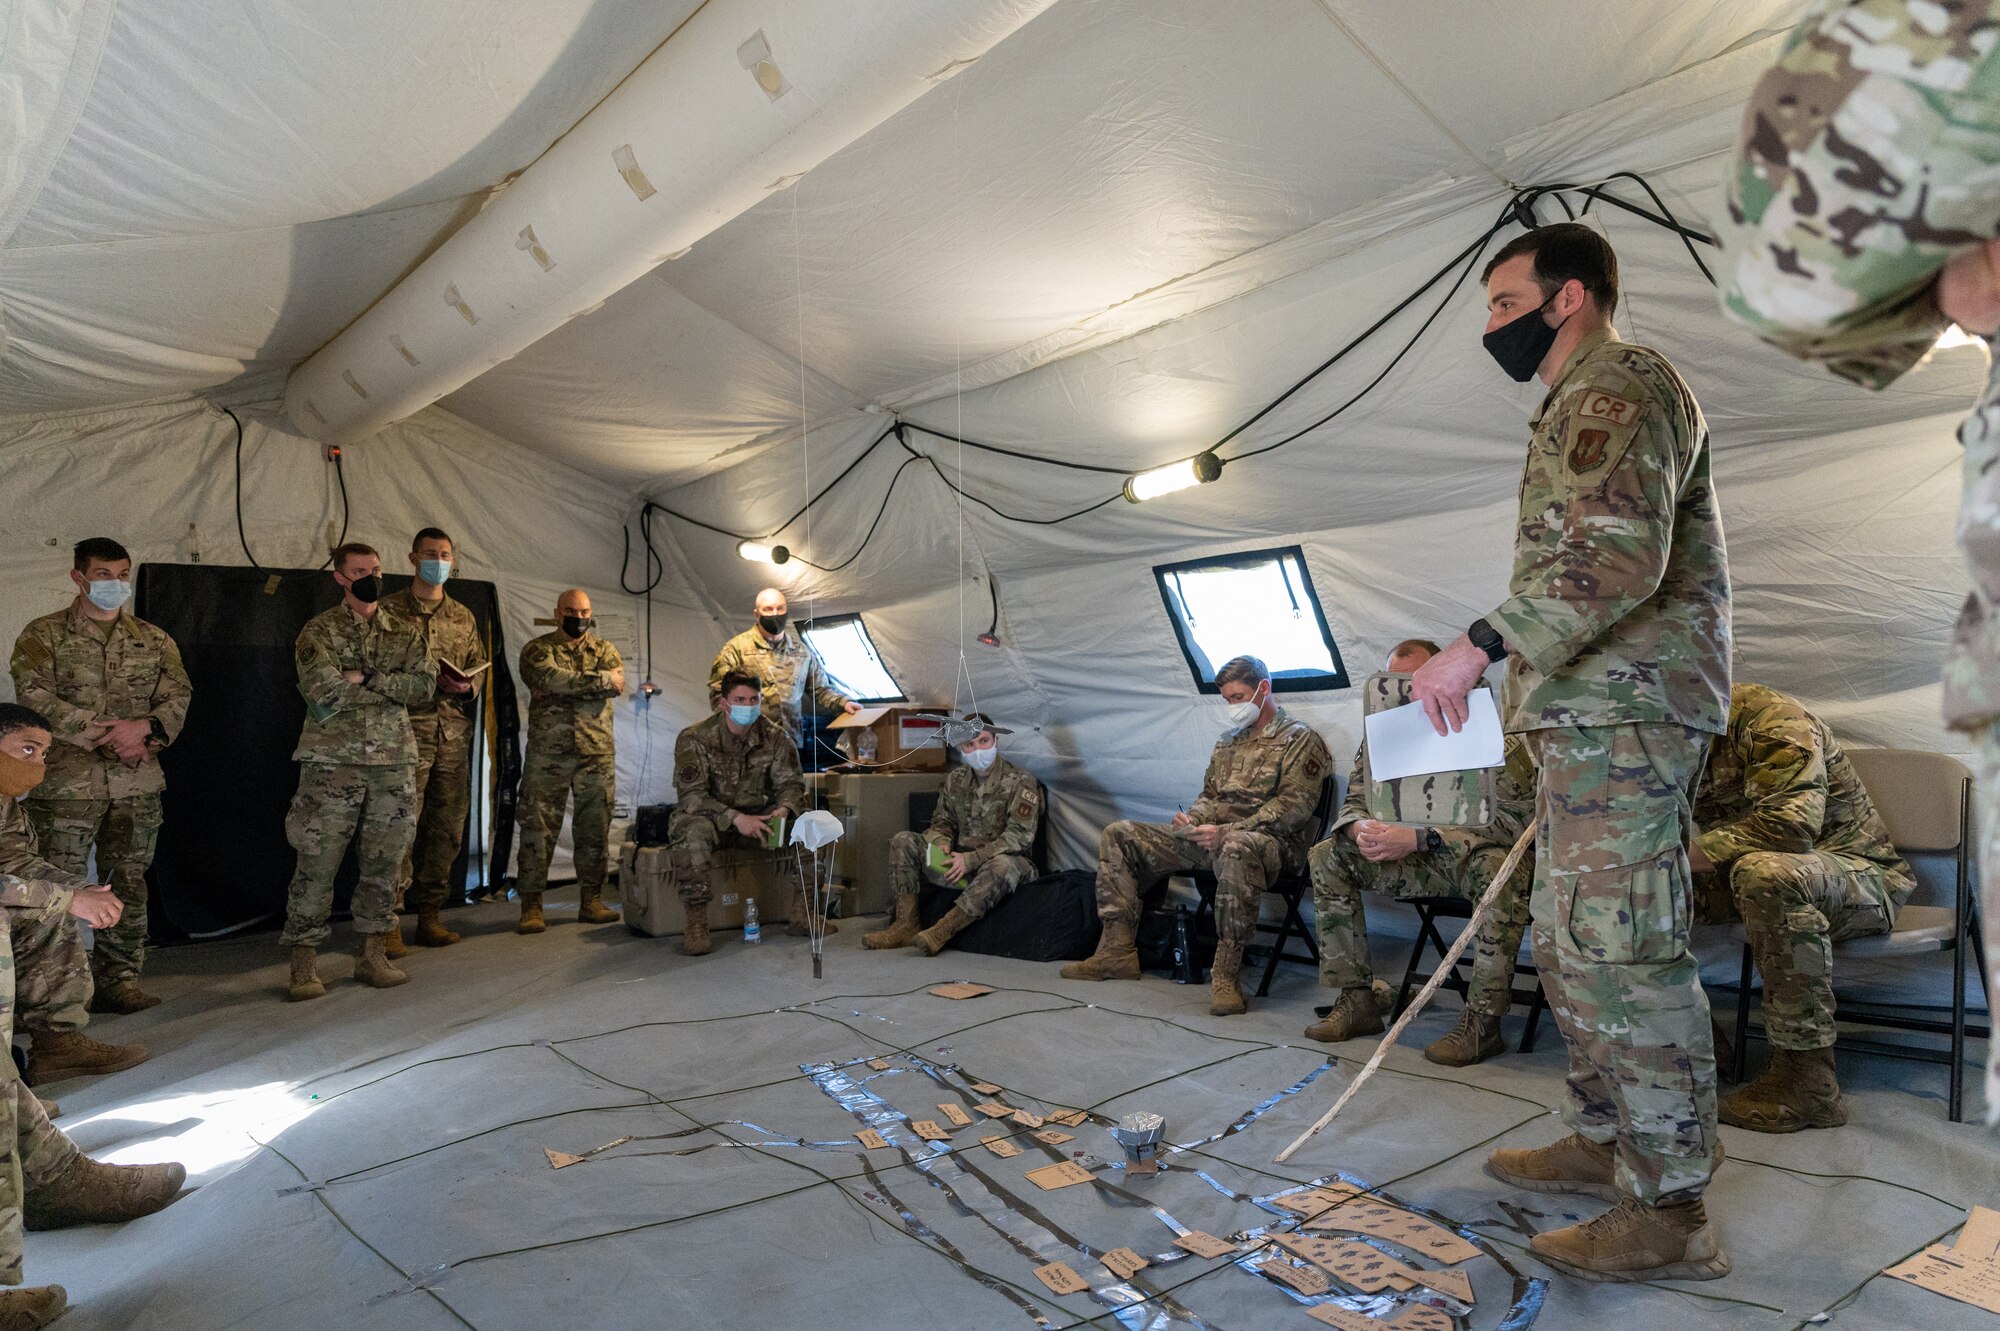 Airmen gathered in a tent.